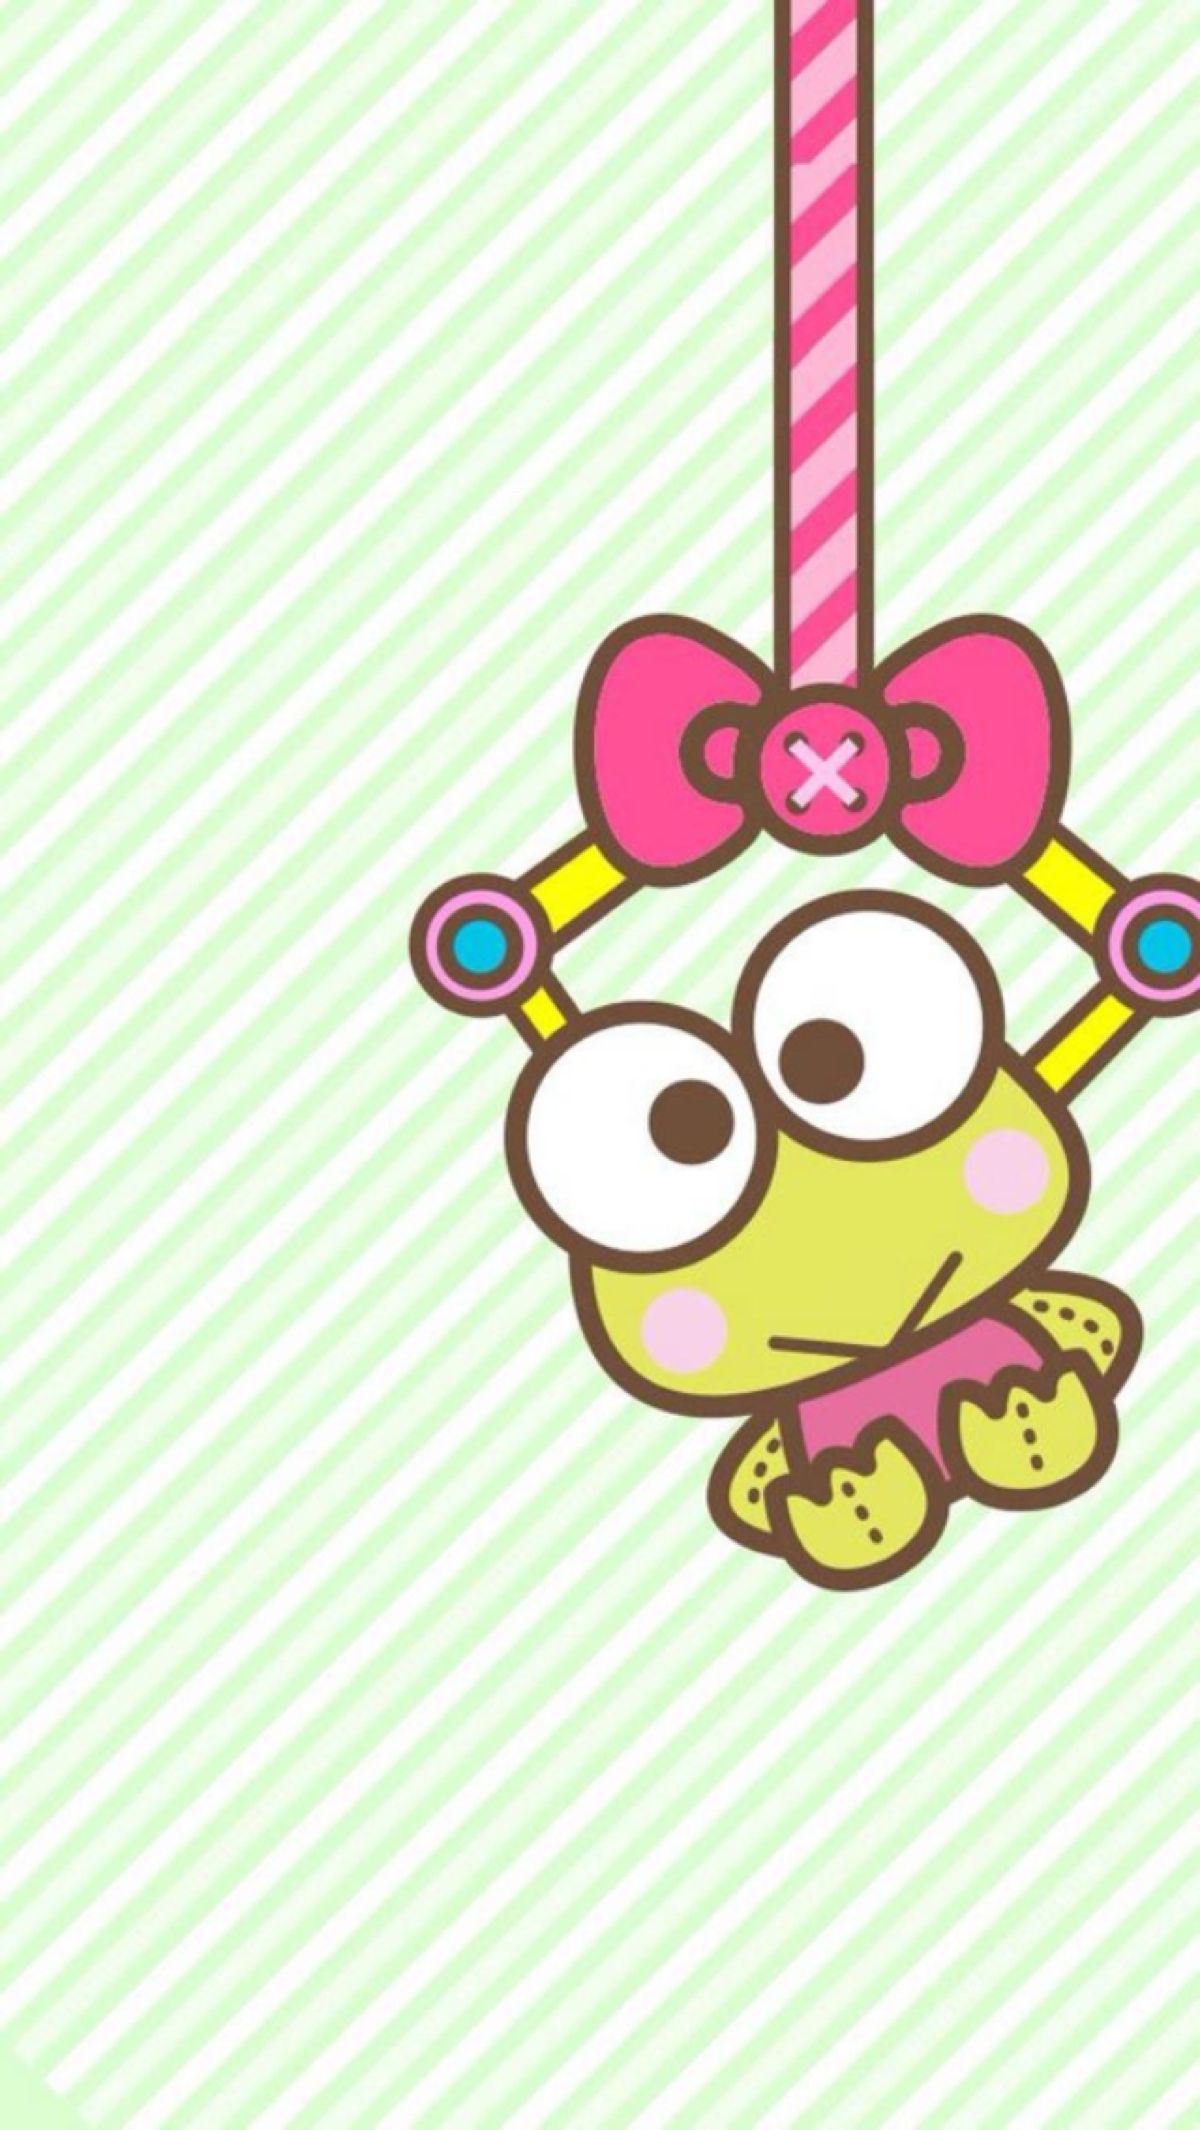 A cute little frog hanging from the ceiling - Keroppi